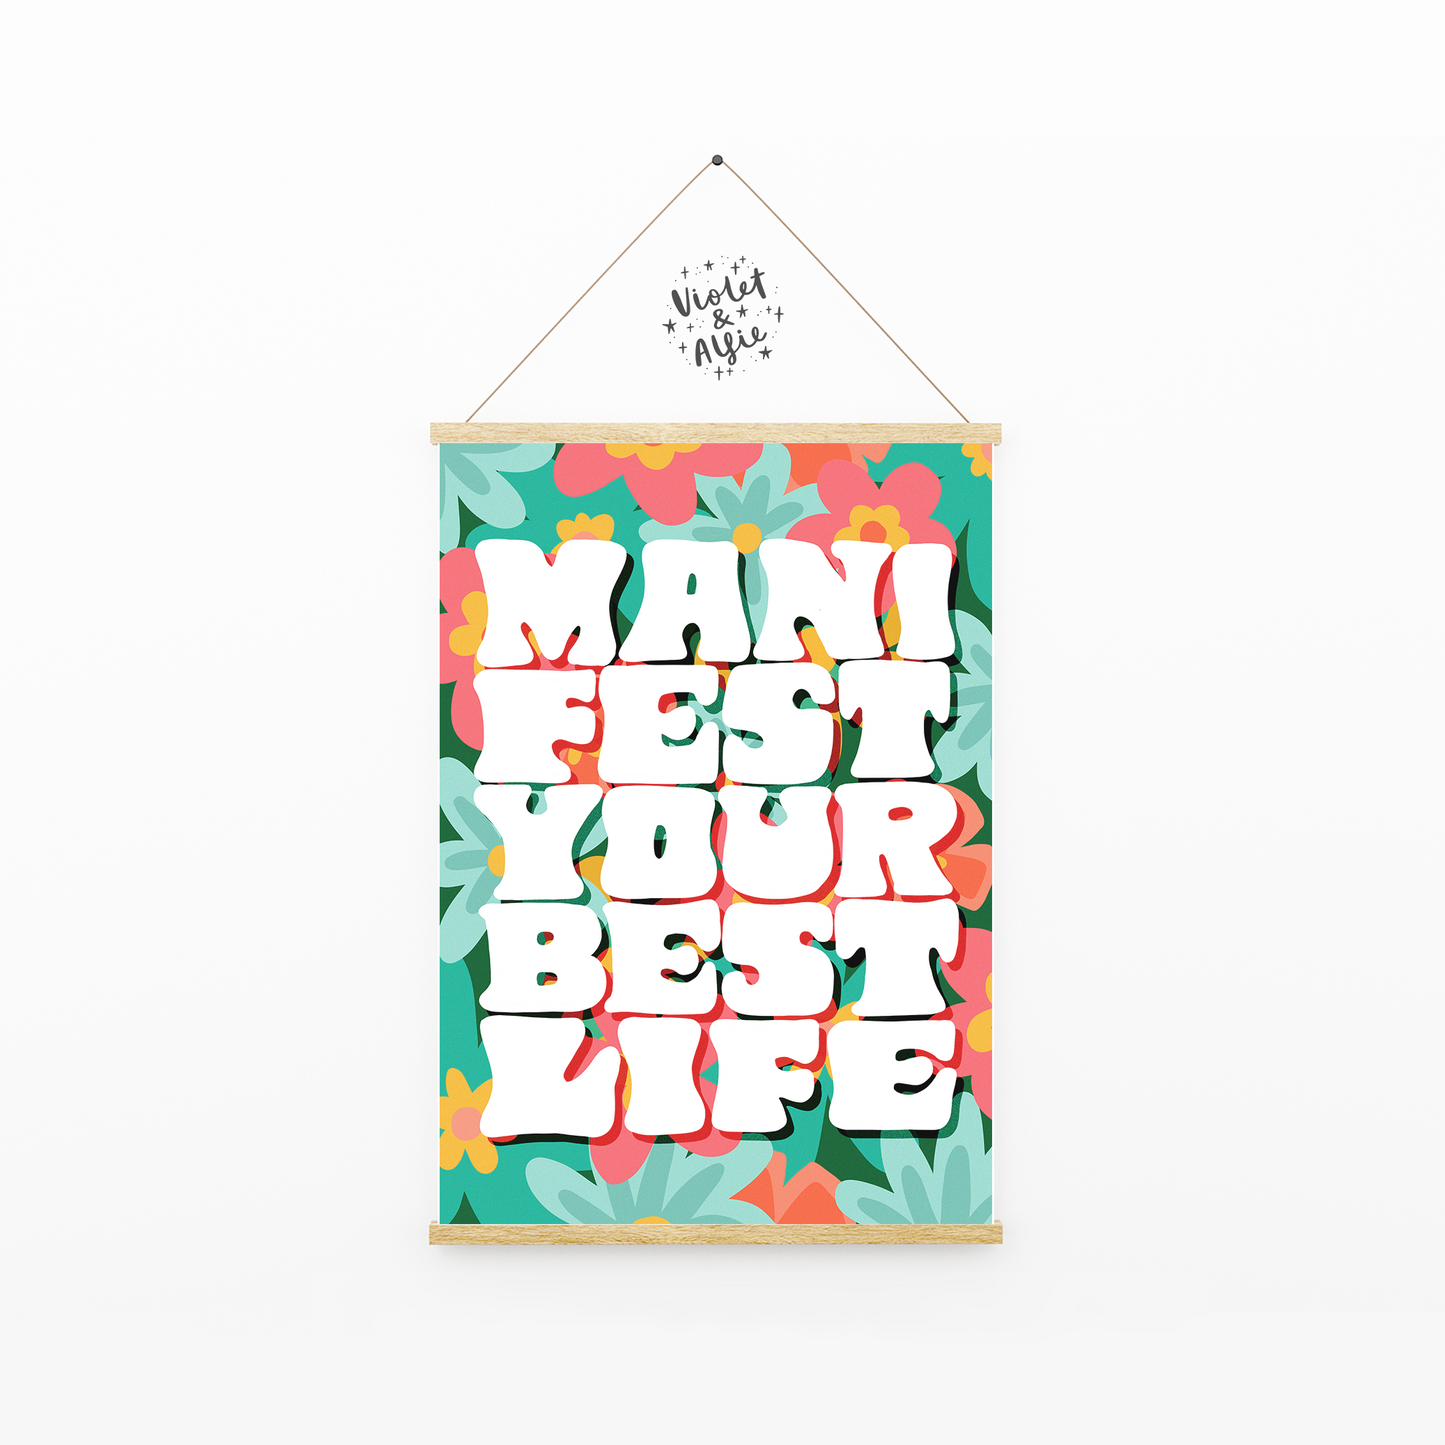 manifest your best life print, manifest quote, colourful floral print, seventies style home decor, inspirational wall art, motivational mantra print